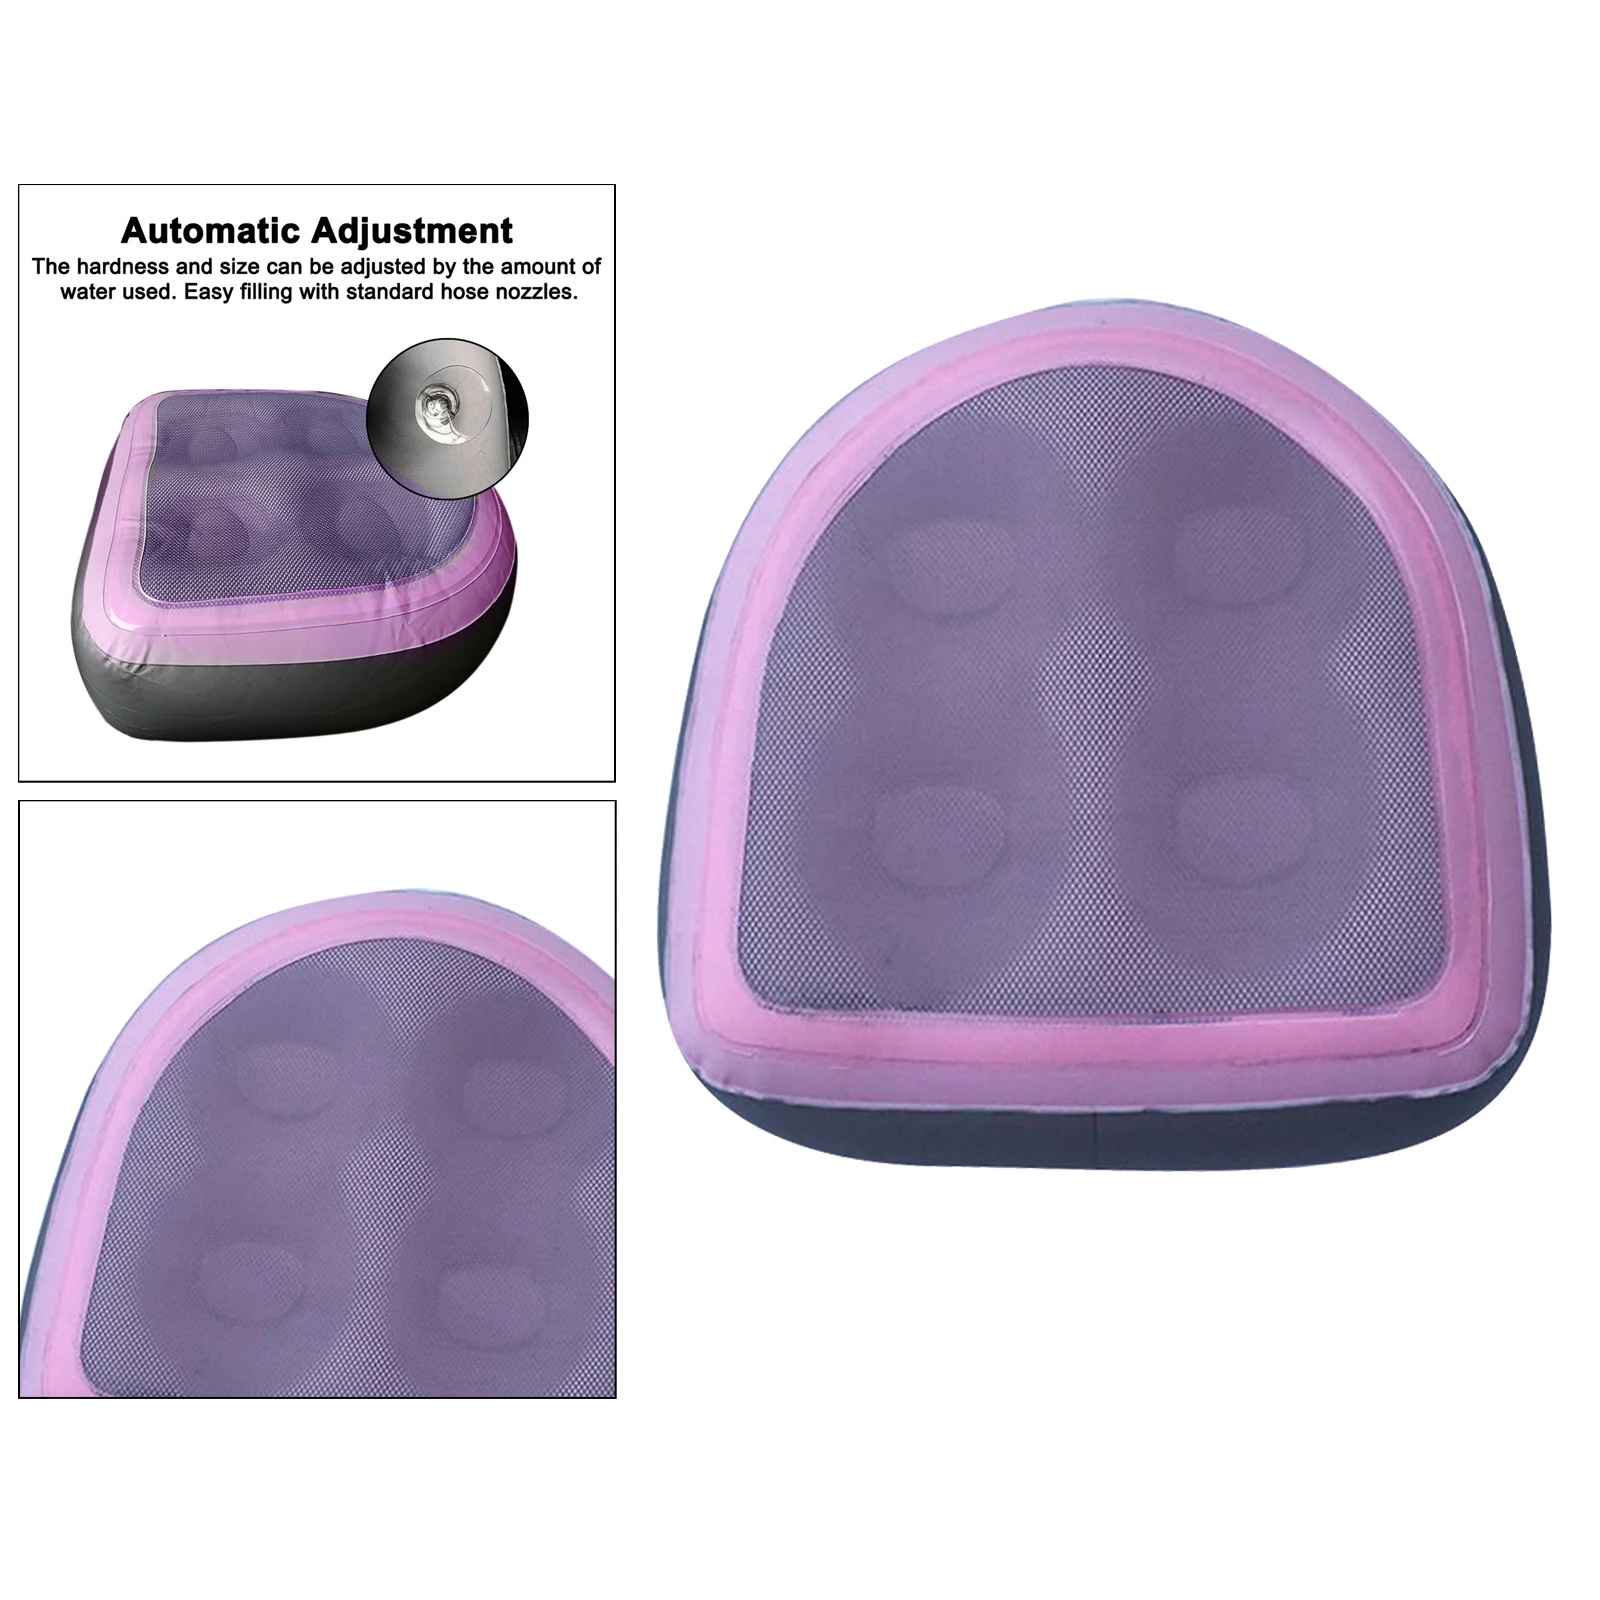 Spa and Hot Tub Booster Seat Inflatable Bathtub Massage Cushion Relaxation Mat with Suction Cups Back Support Pad